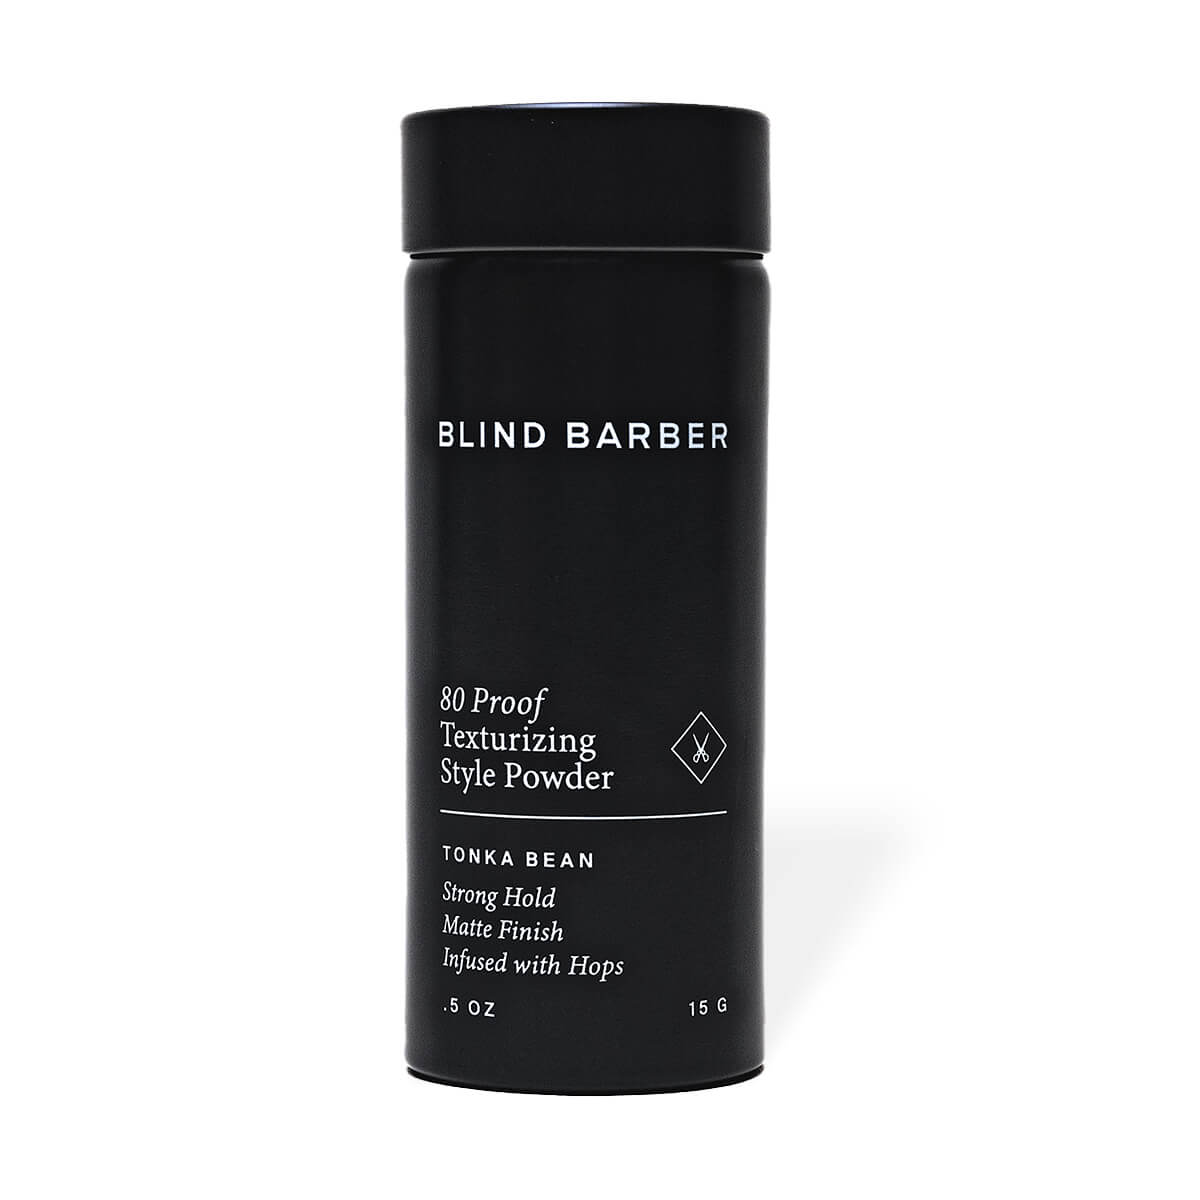 80 Proof Texturizing Styling Powder 15g by Blind Barber